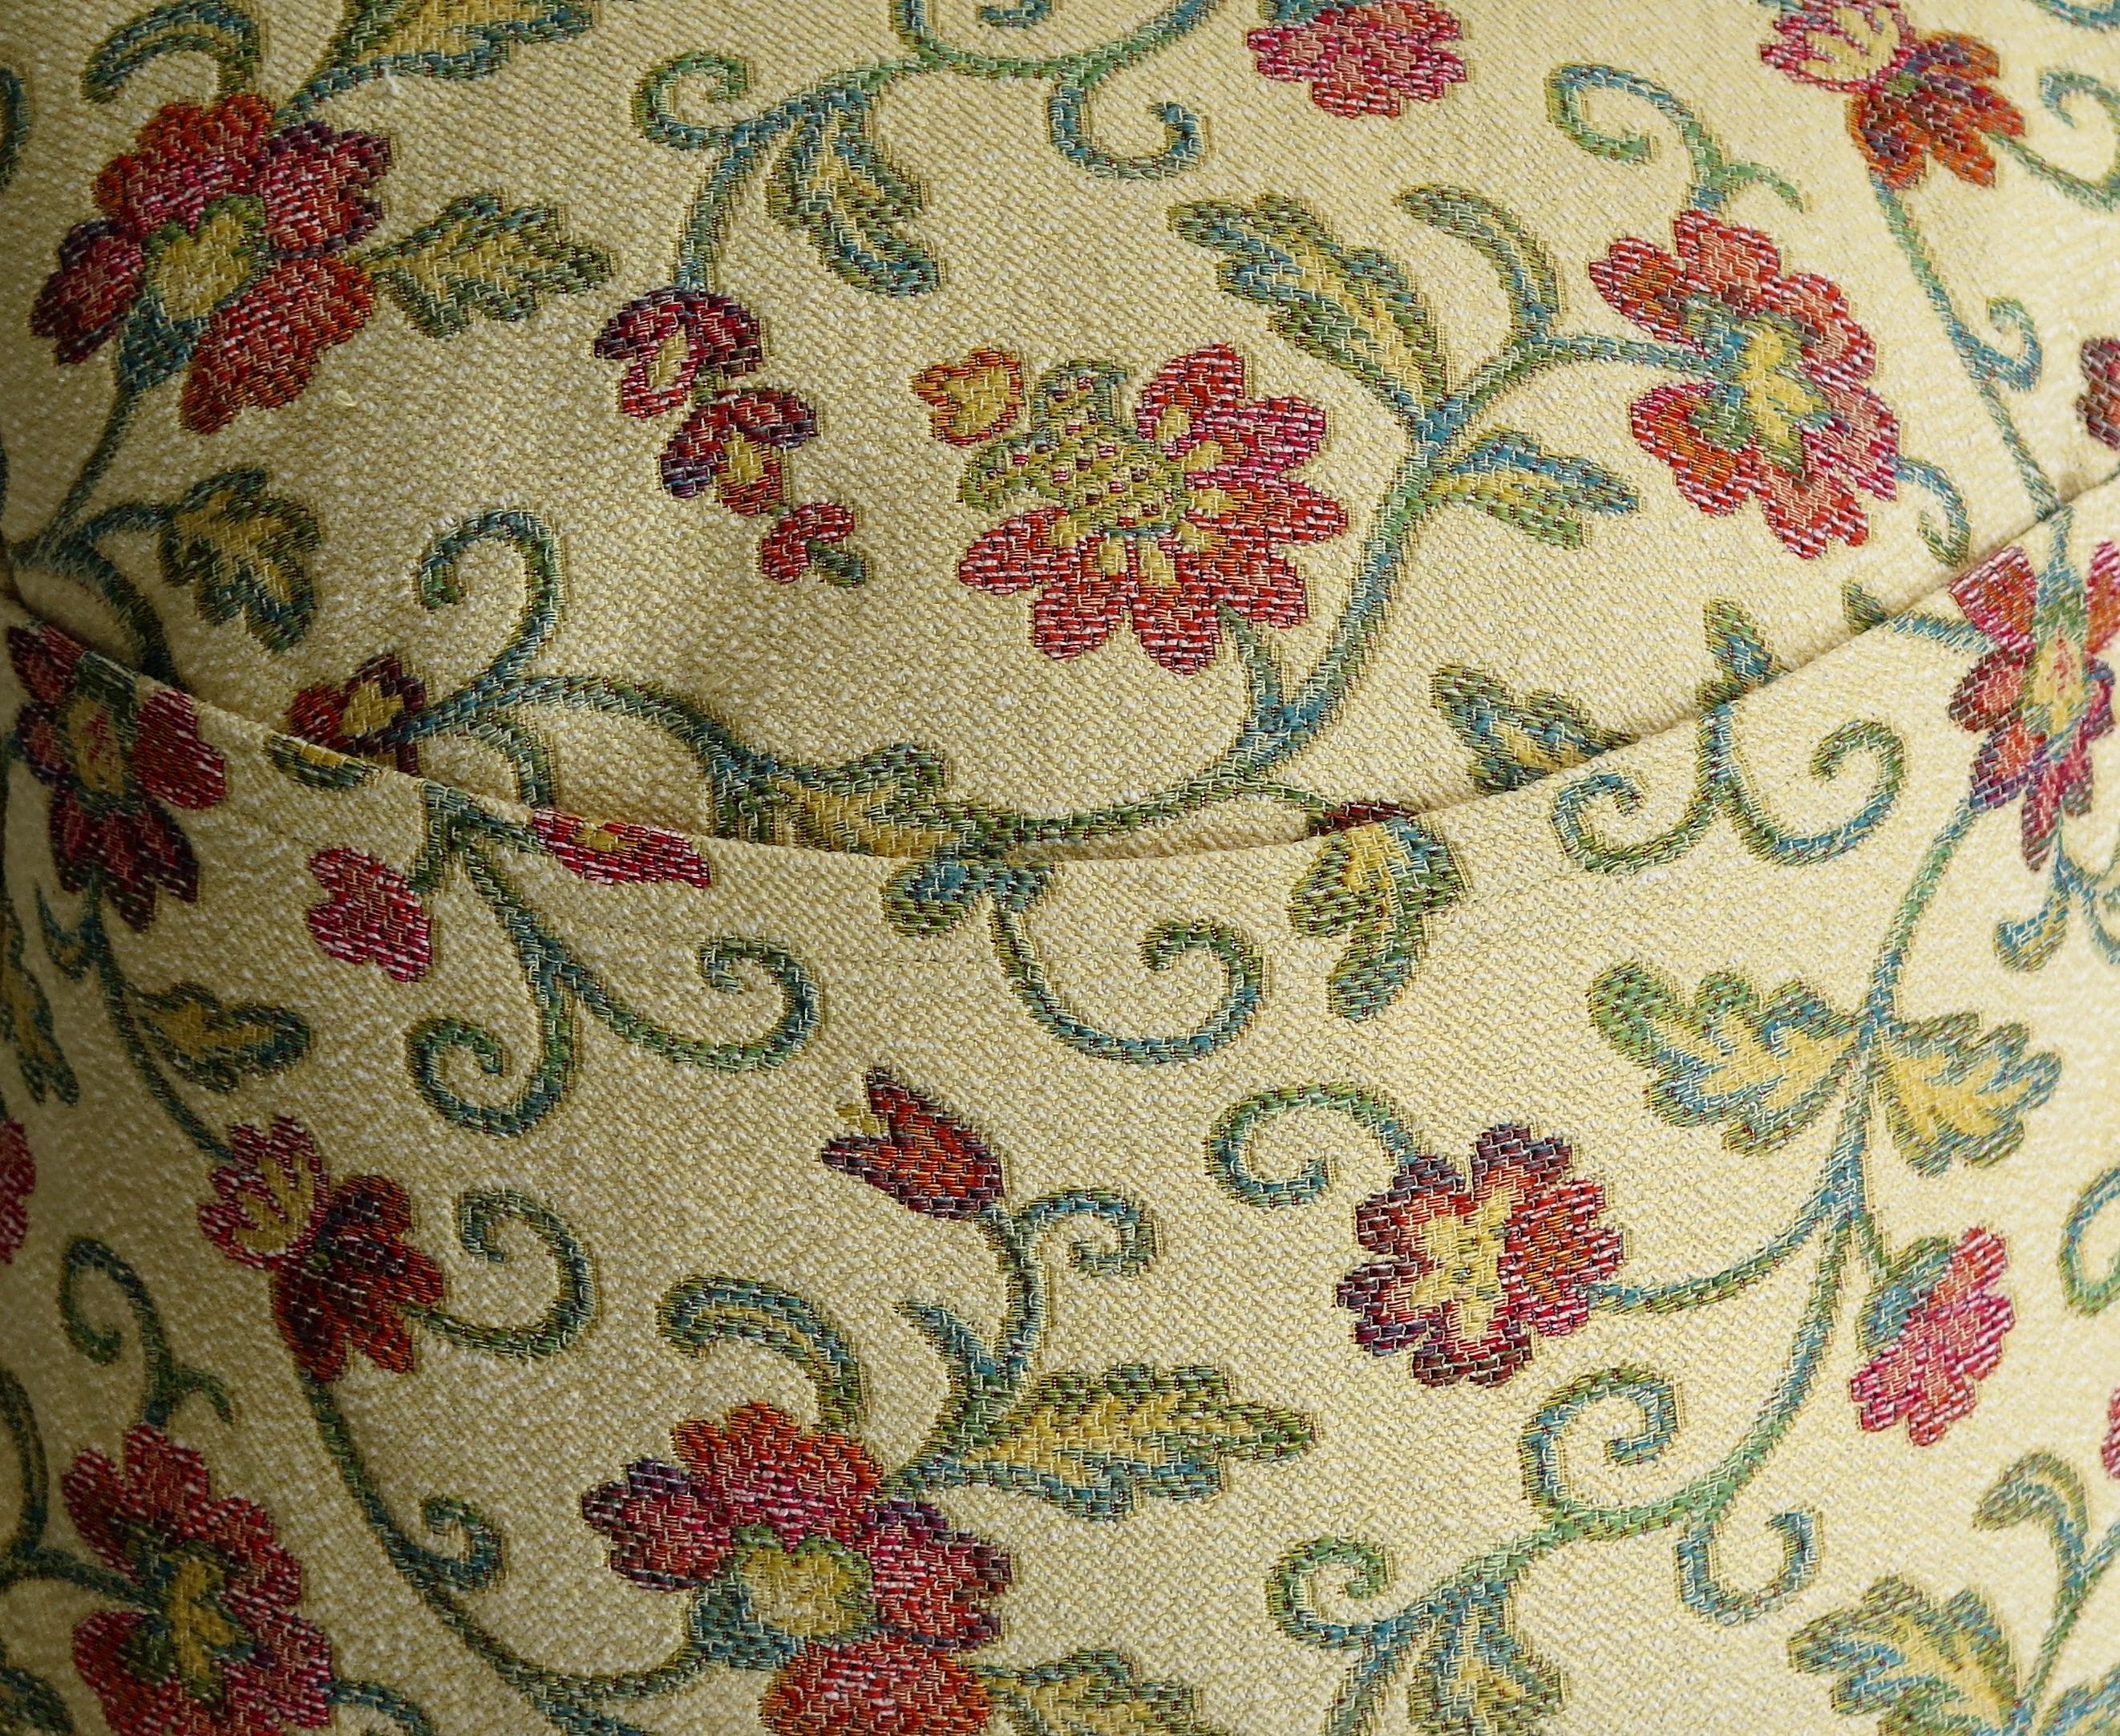 Woven Cushion or Pillow in Art Nouveau Floral Vine Style, 20th Century For Sale 5